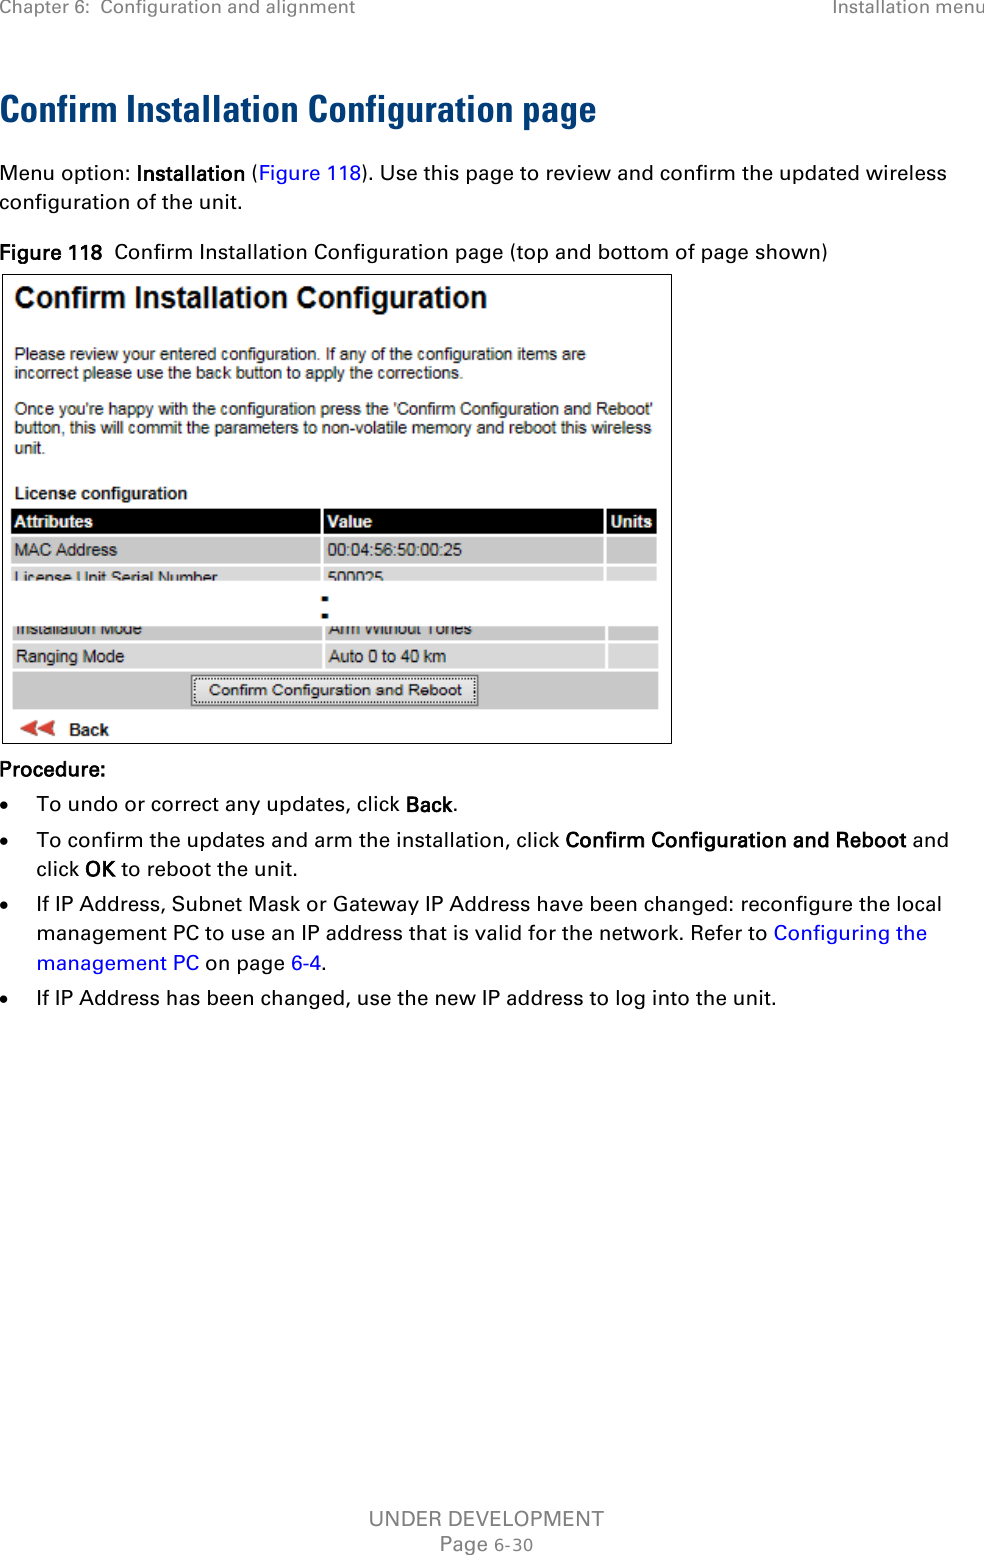 Chapter 6:  Configuration and alignment Installation menu  Confirm Installation Configuration page Menu option: Installation (Figure 118). Use this page to review and confirm the updated wireless configuration of the unit. Figure 118  Confirm Installation Configuration page (top and bottom of page shown)  Procedure: • To undo or correct any updates, click Back. • To confirm the updates and arm the installation, click Confirm Configuration and Reboot and click OK to reboot the unit. • If IP Address, Subnet Mask or Gateway IP Address have been changed: reconfigure the local management PC to use an IP address that is valid for the network. Refer to Configuring the management PC on page 6-4. • If IP Address has been changed, use the new IP address to log into the unit.  UNDER DEVELOPMENT Page 6-30 